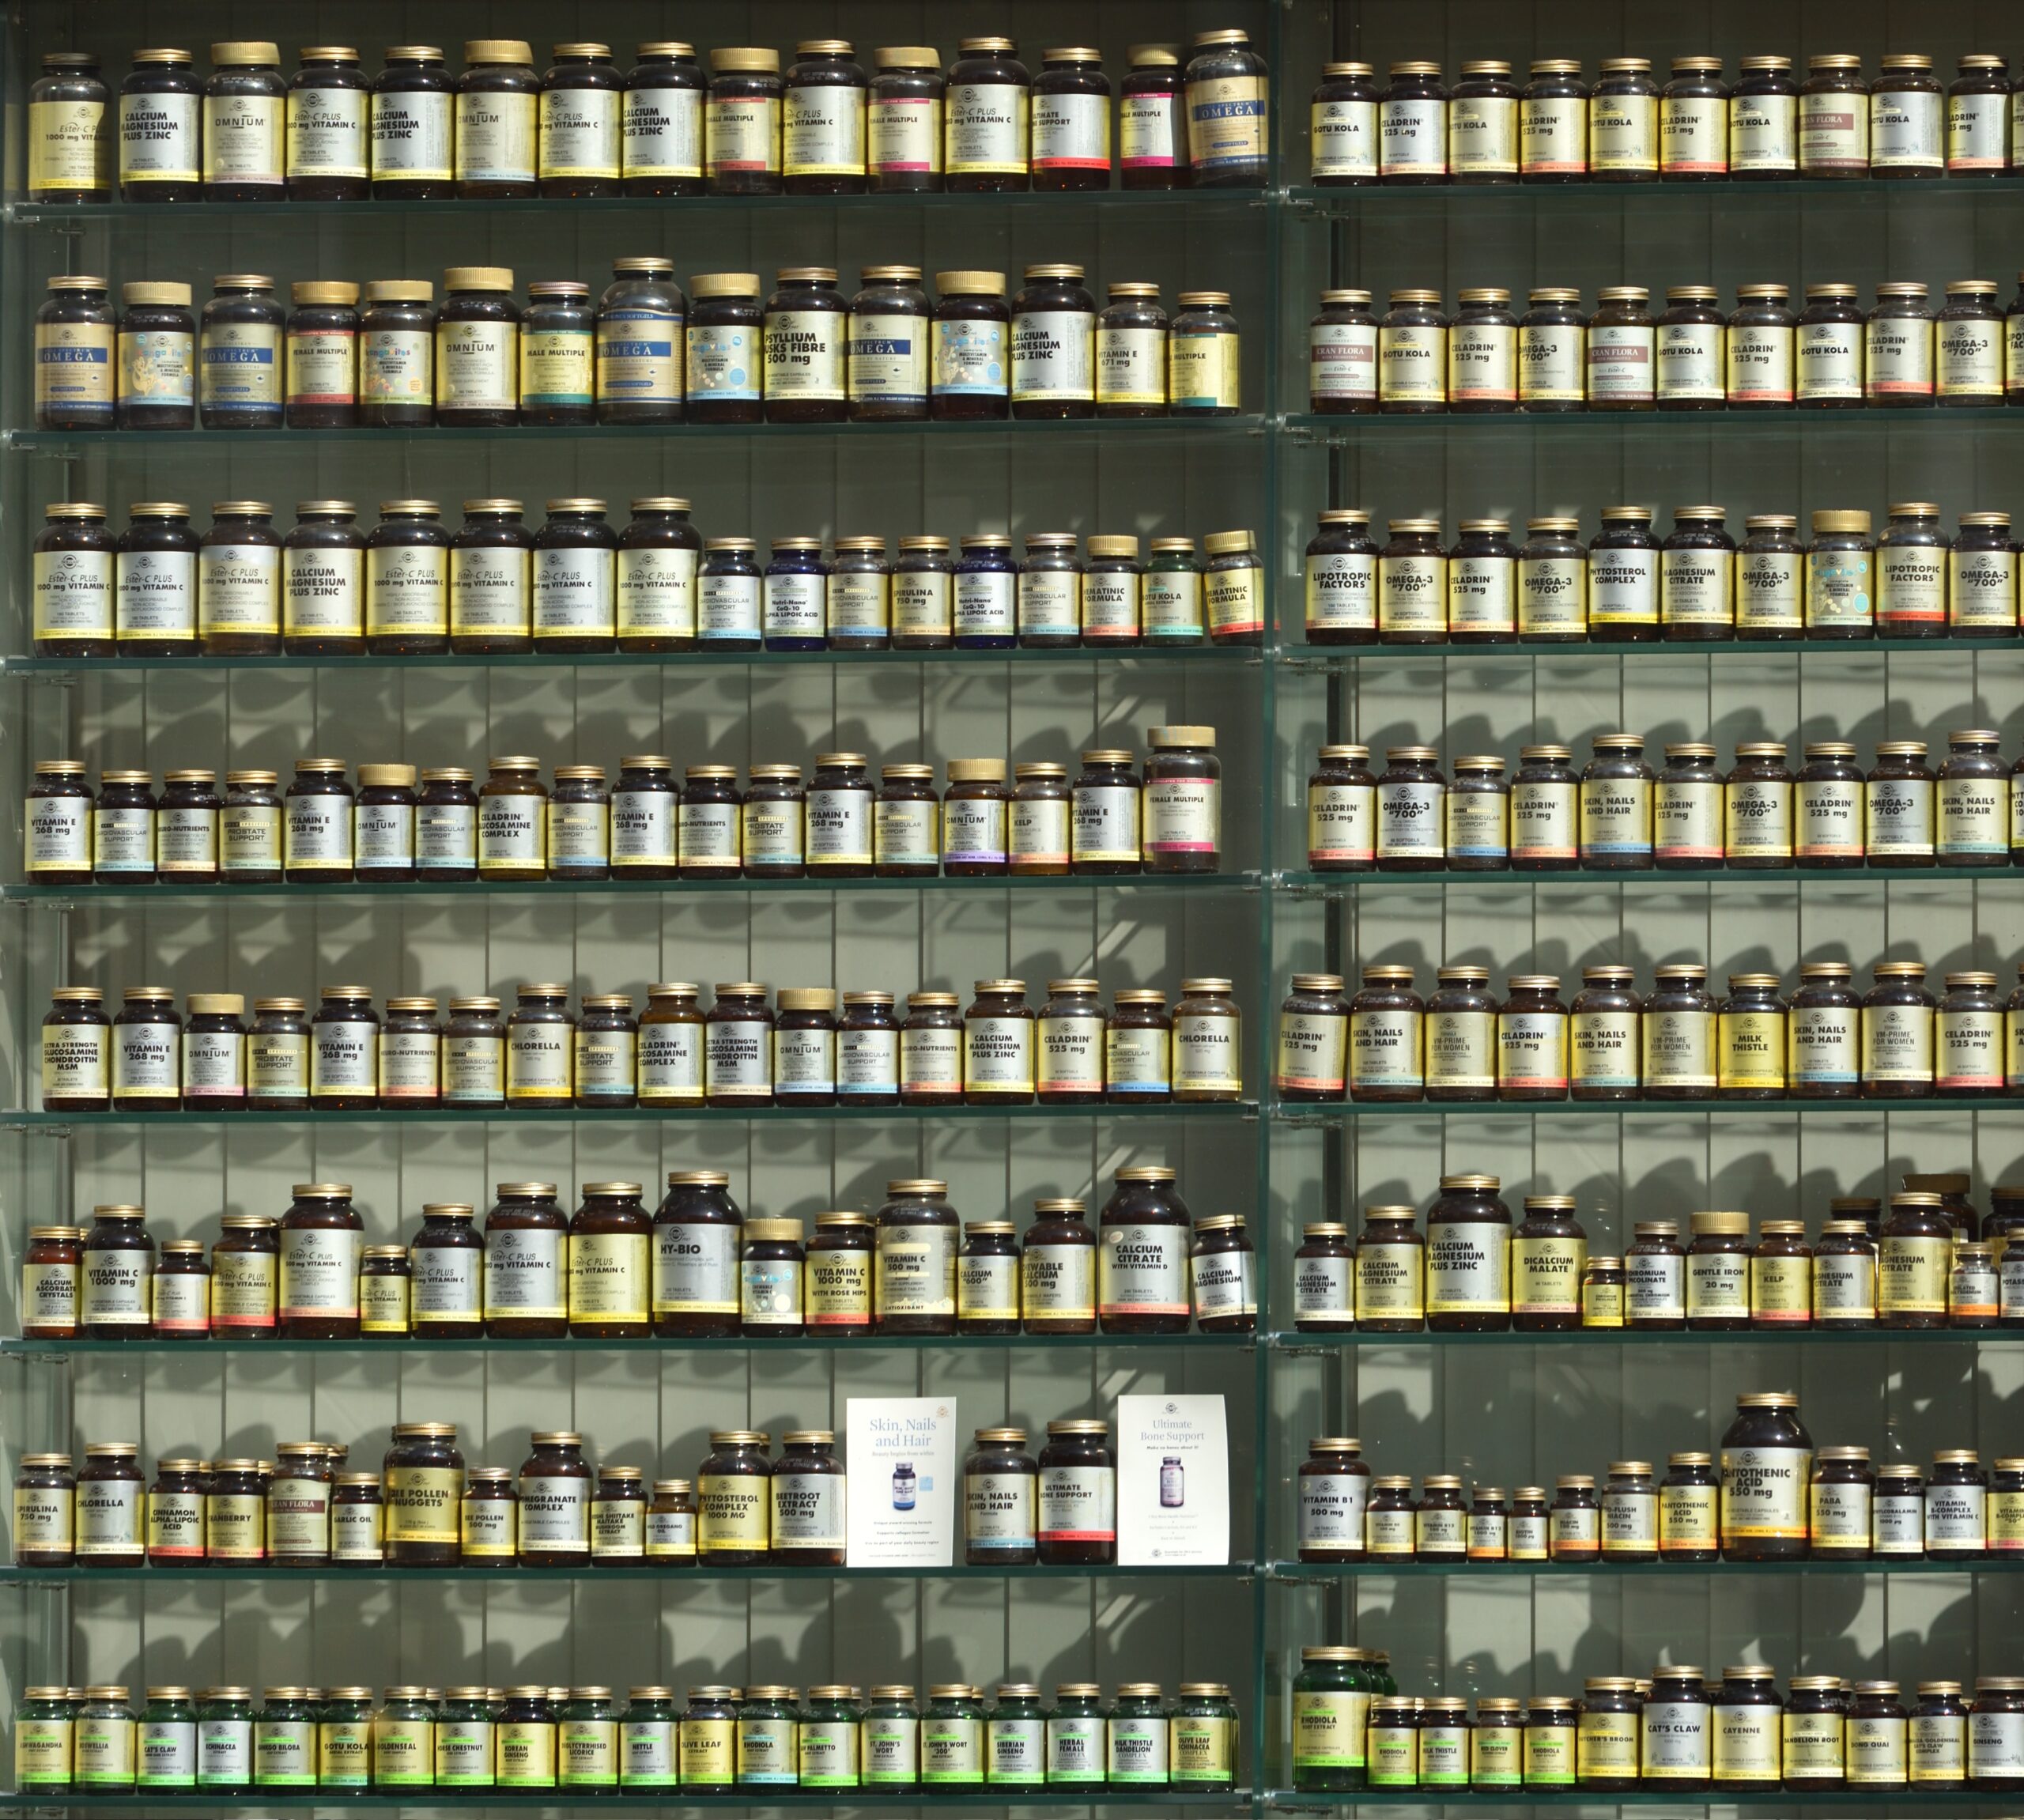 Many Shelves of Supplements